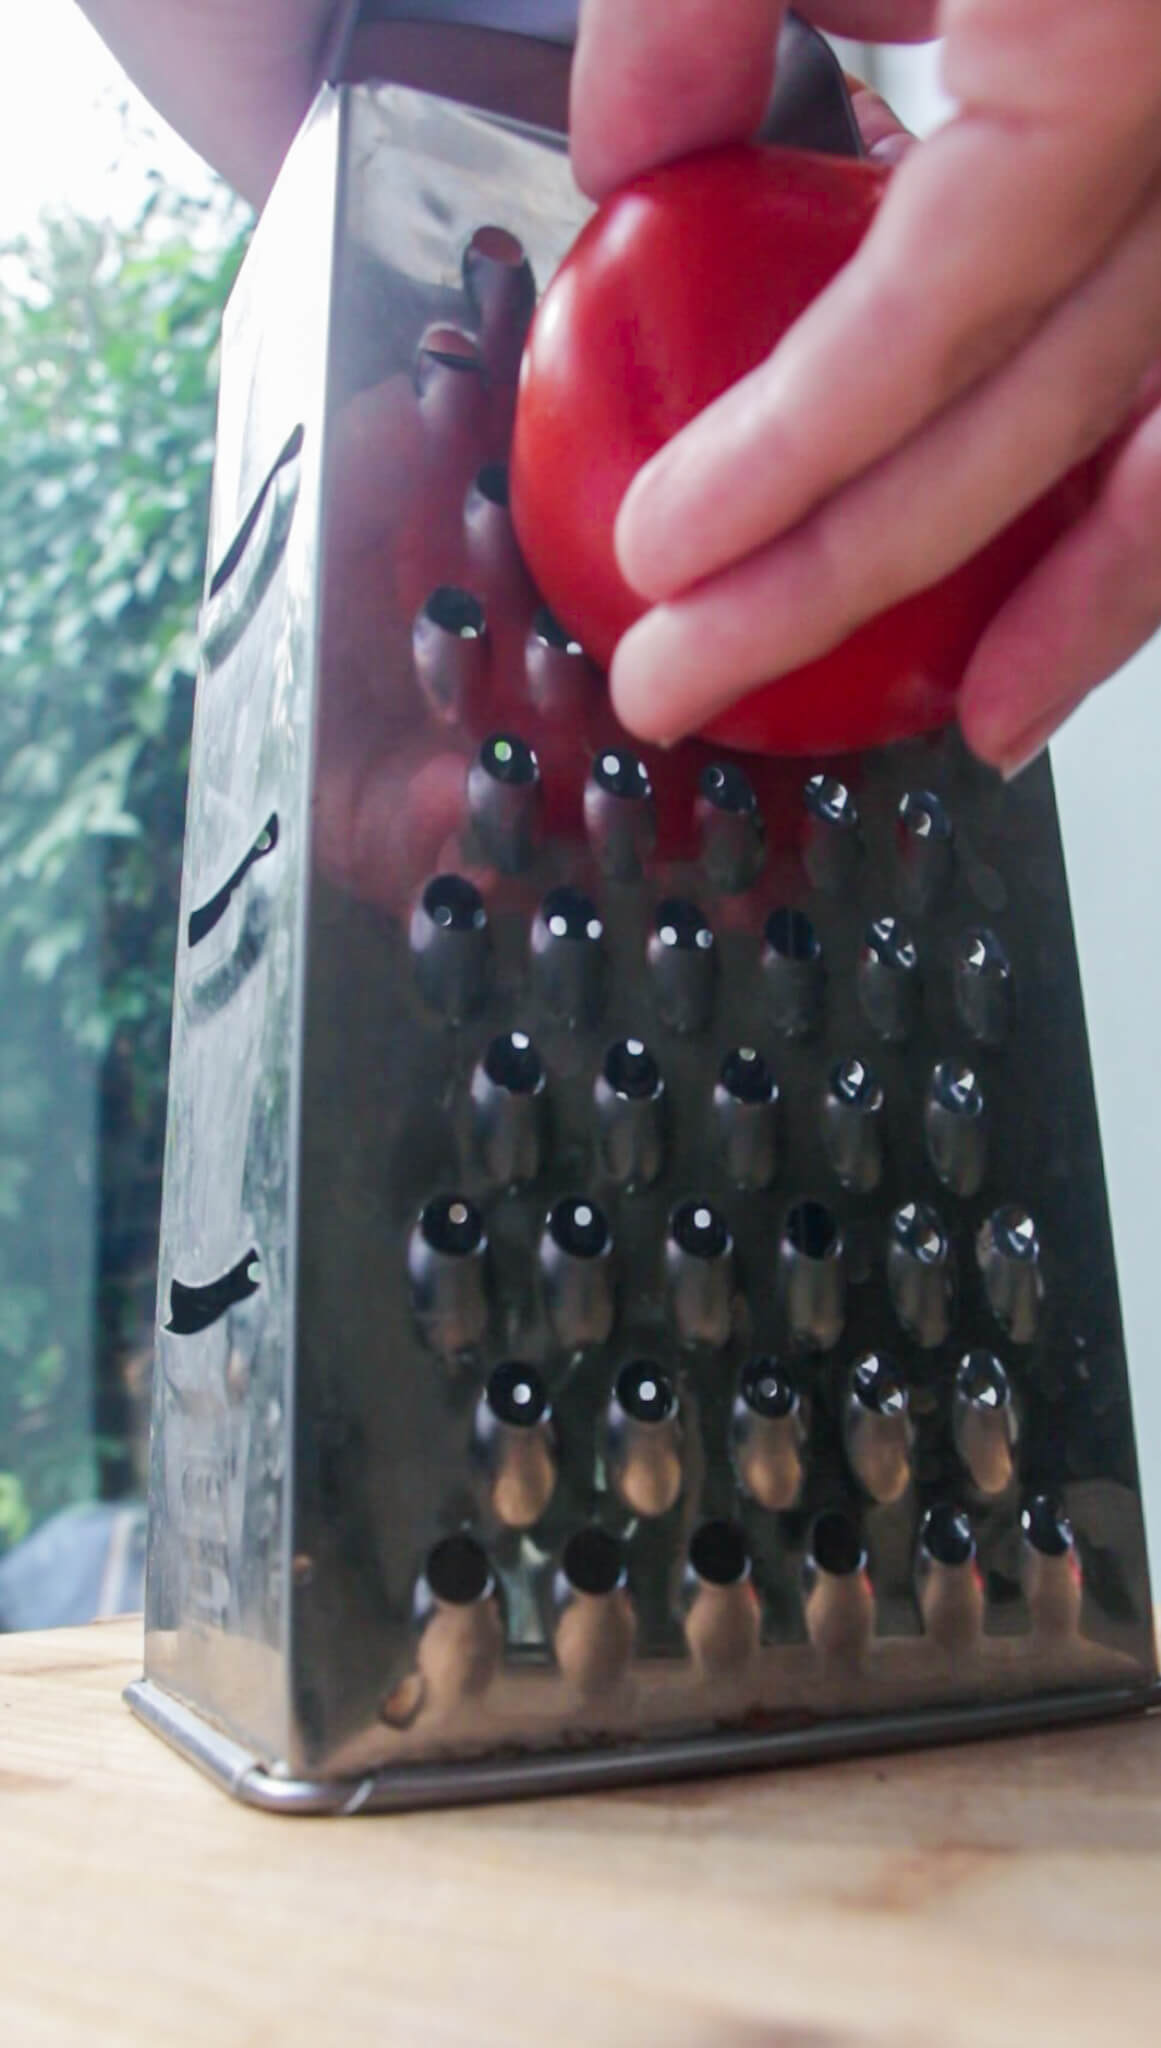 Grating a large tomato on the side of a silver grater.